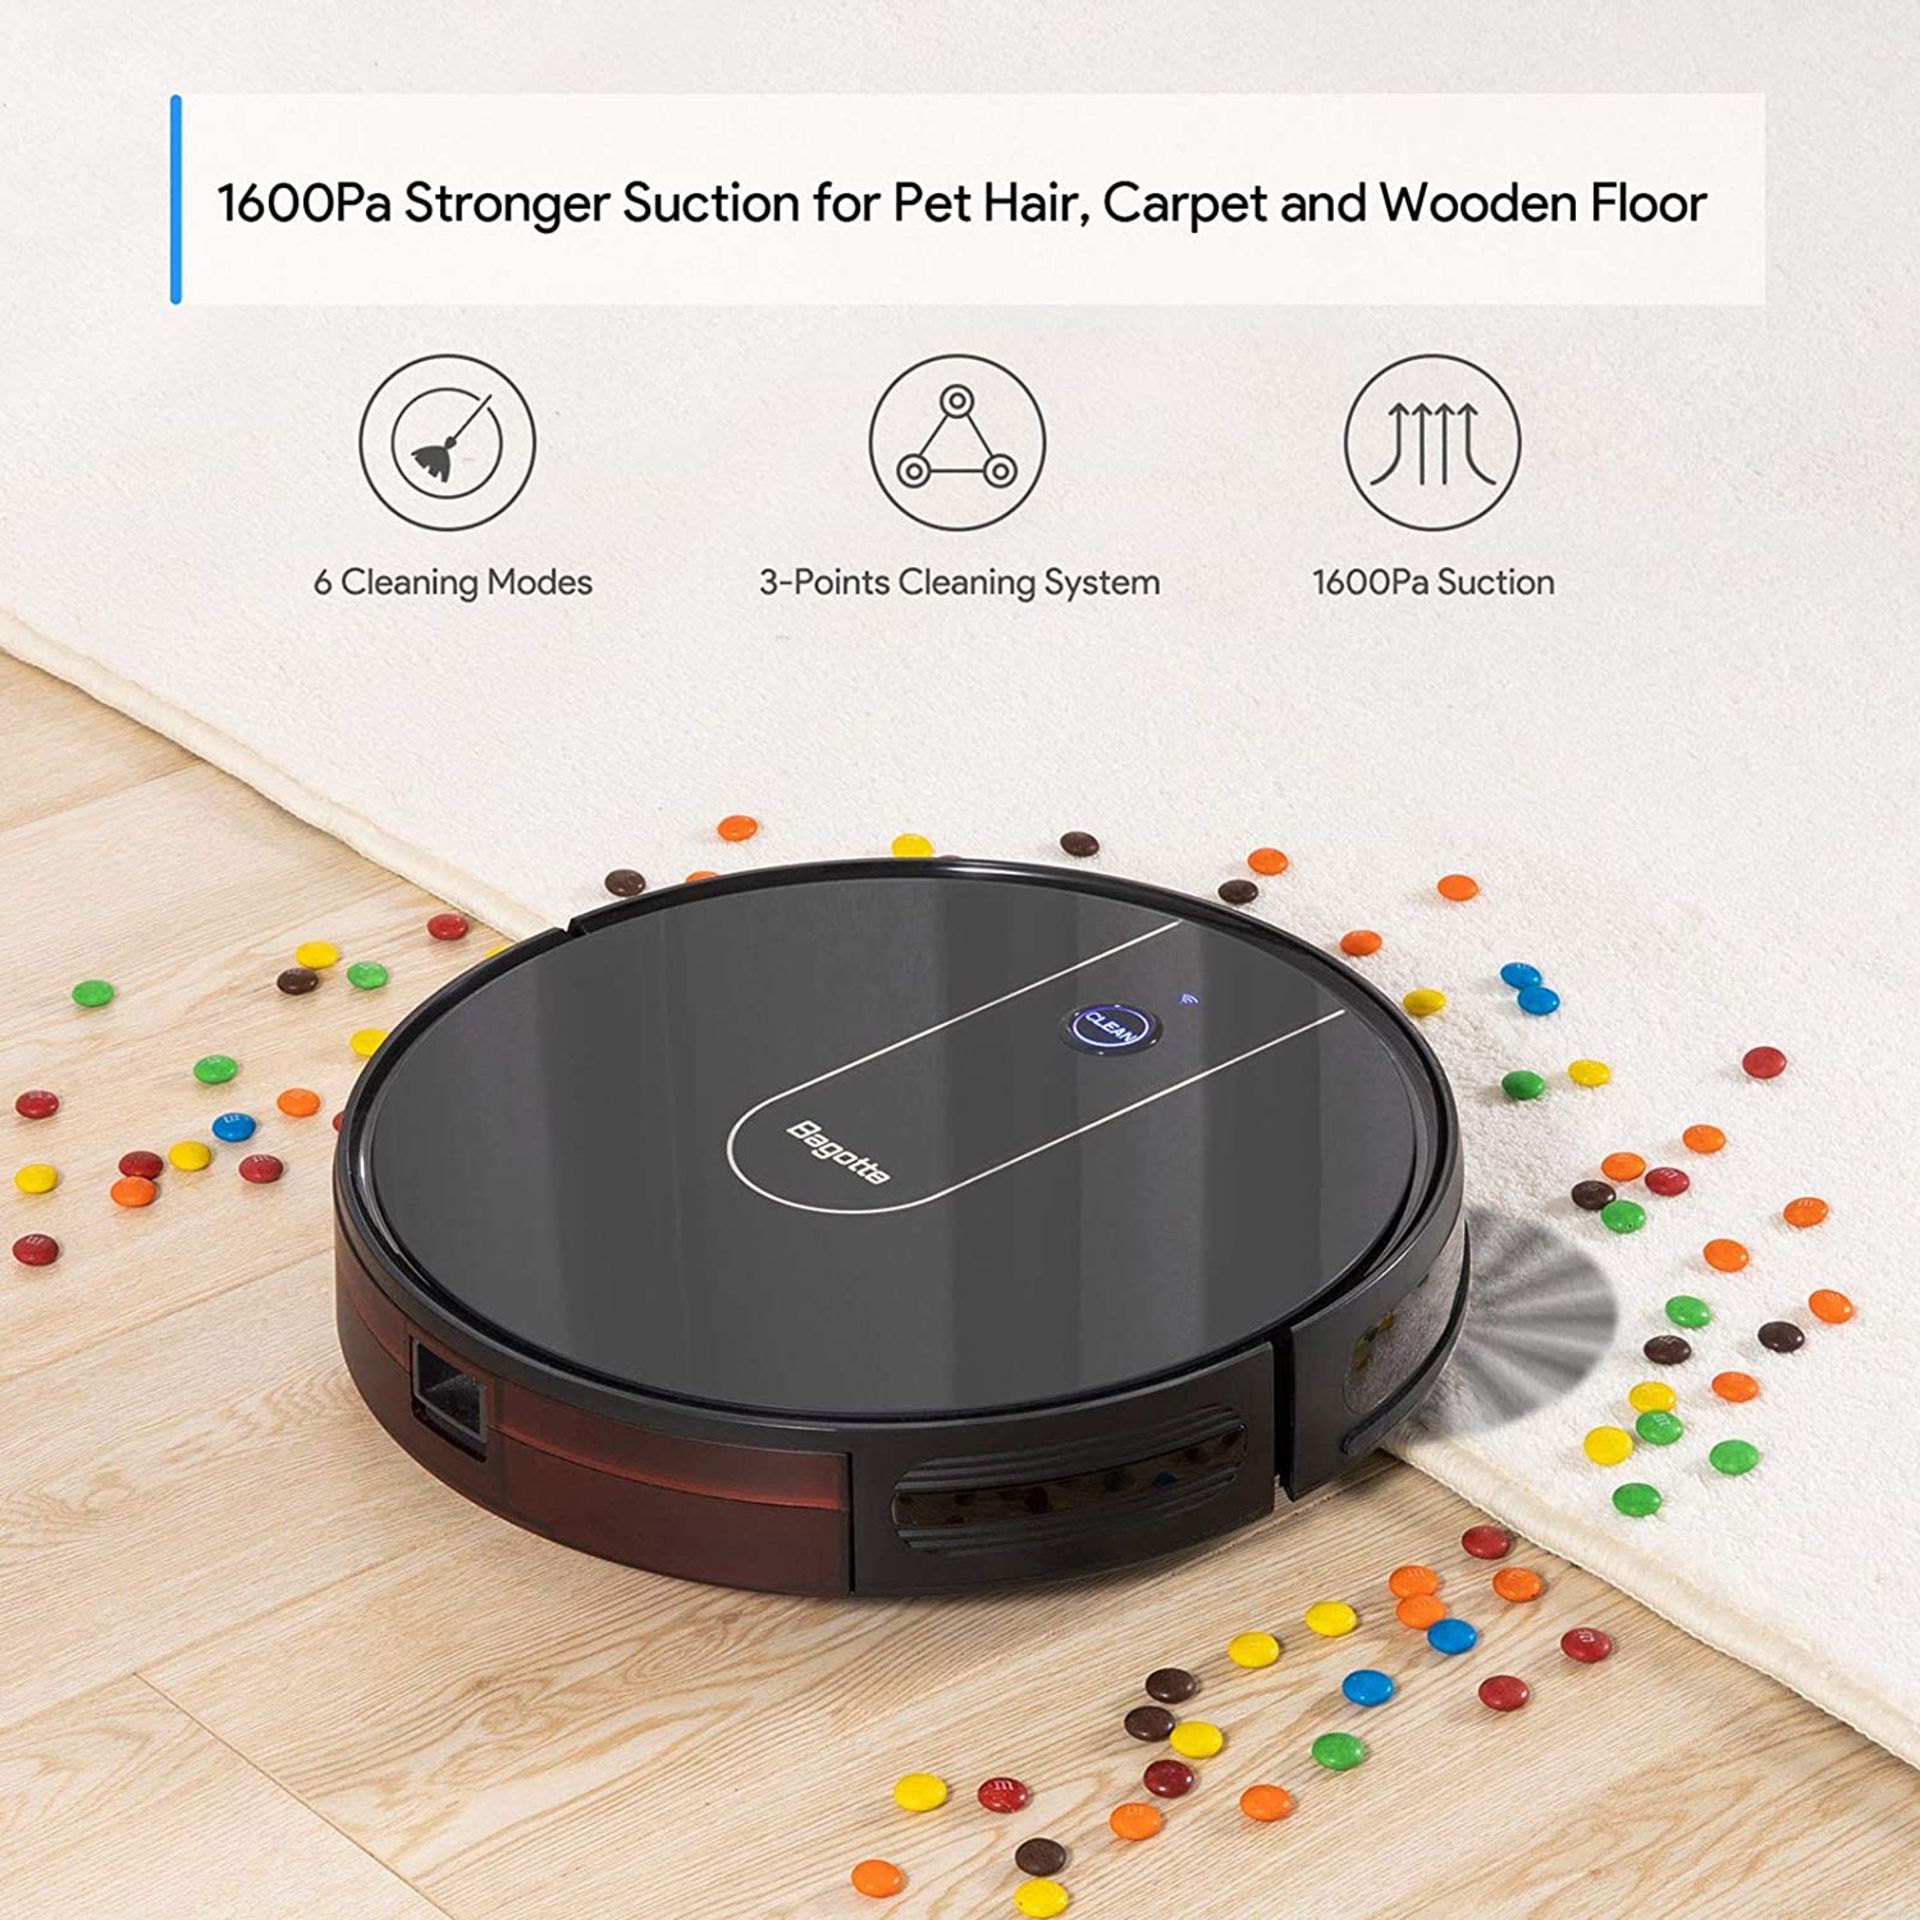 Bagotte BG700 Wi-Fi Robot Vacuum with mop - 2.7" Thin, Strong Suction, Work with Alexa - Image 6 of 8